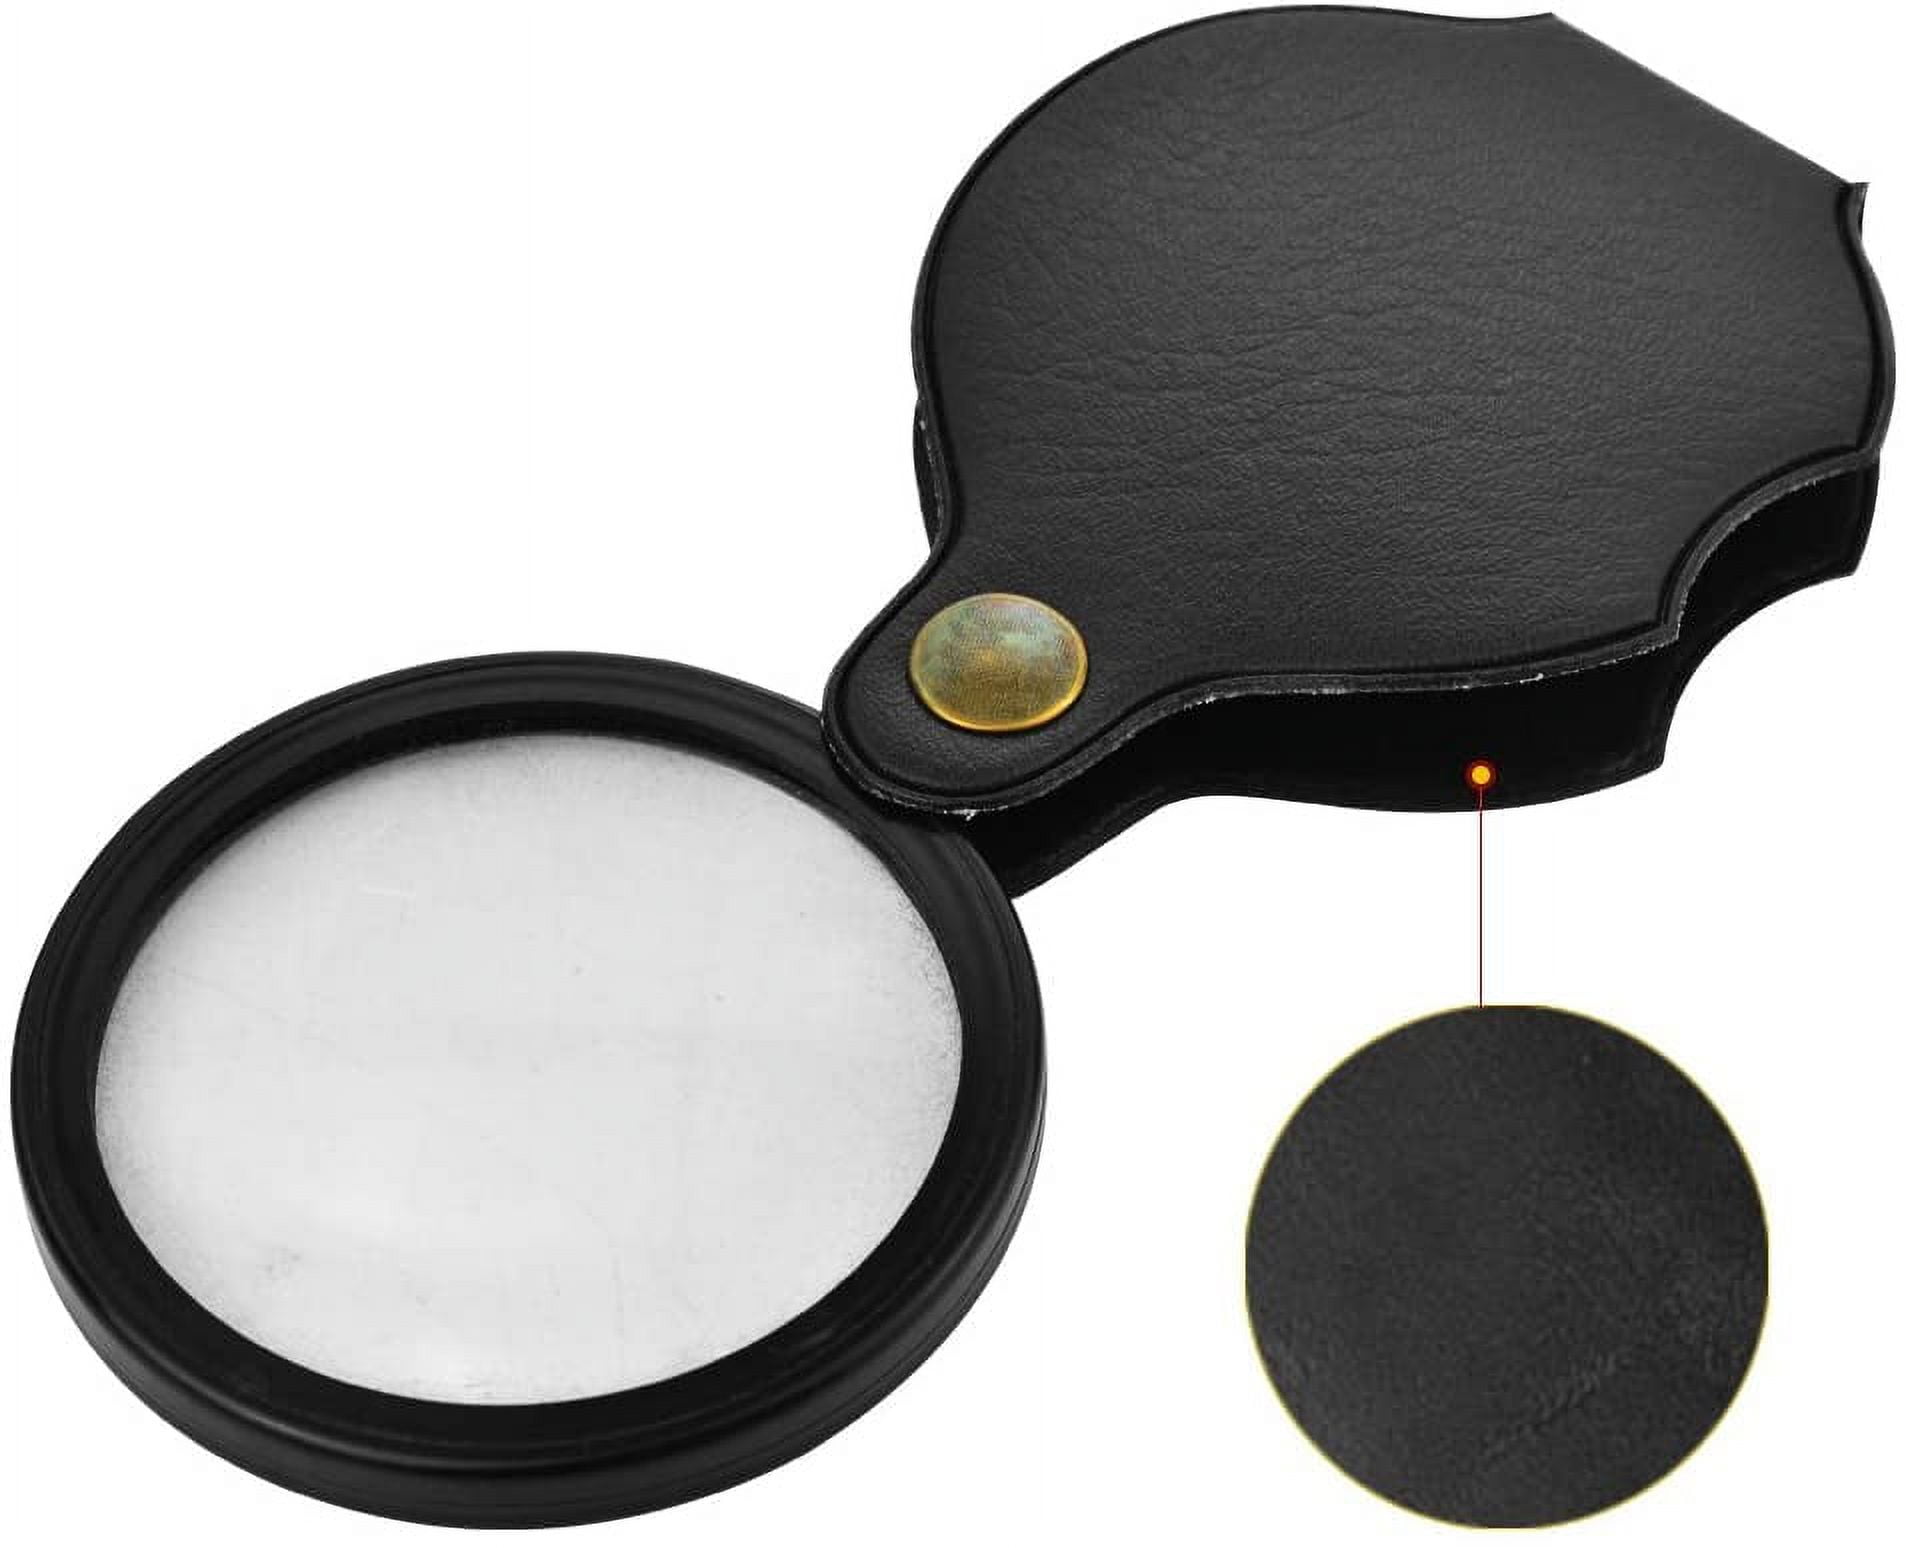 Heldig 2pcs 10x Small Pocket Magnify Glass Premium Folding Mini Magnifying  Glass with Rotating Protective Leather Sheath, Apply to Reading, Science,  Jewelry, Hobbies, Books, 